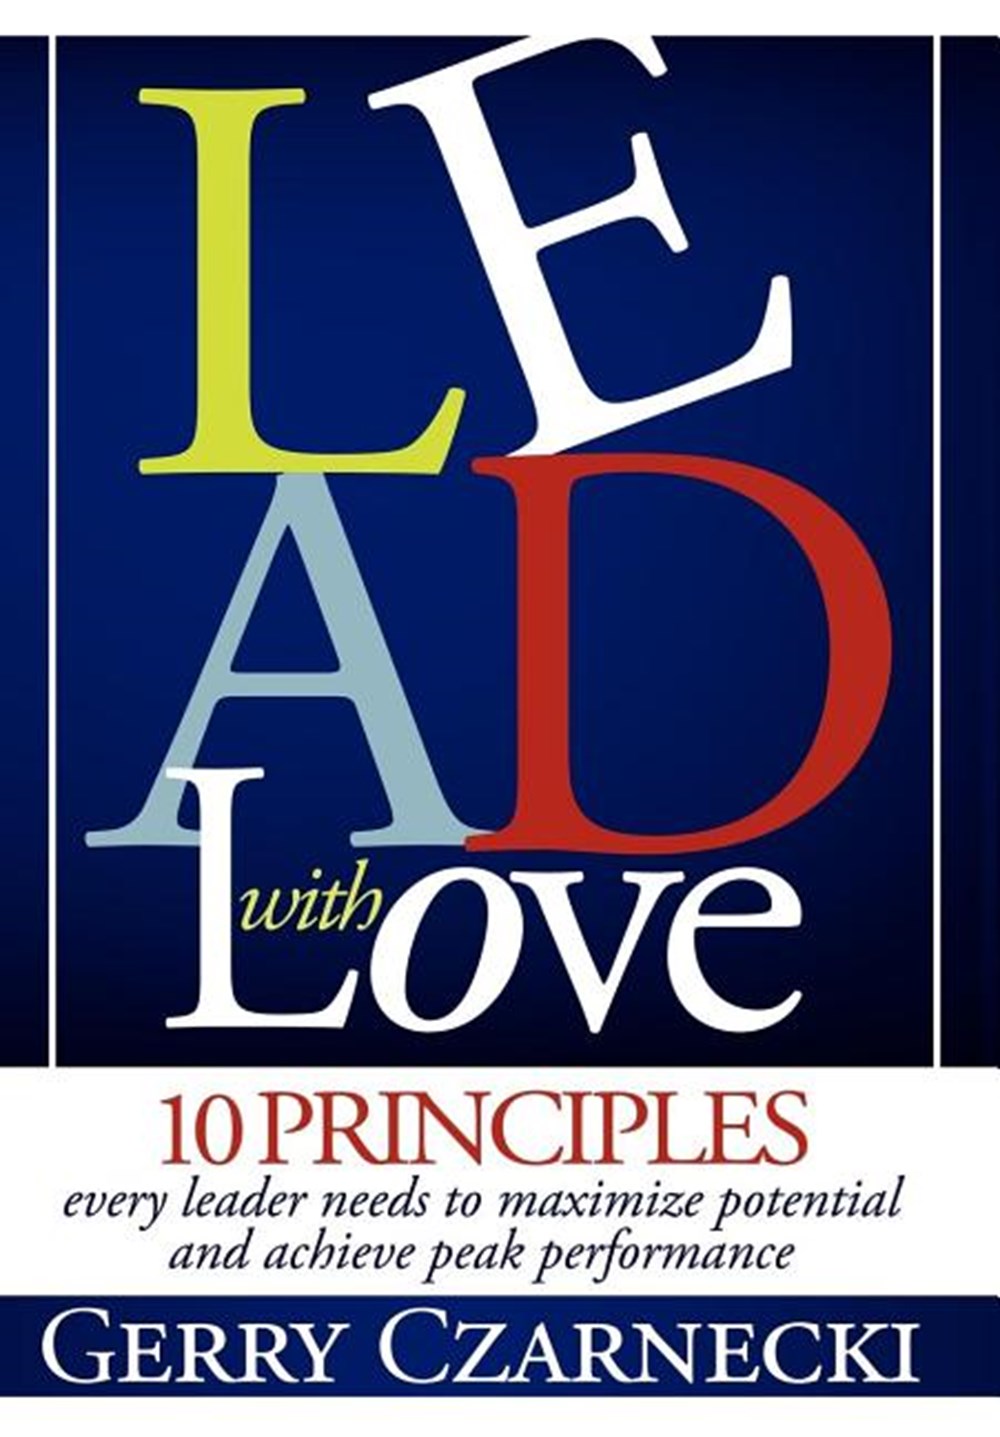 Lead with Love 10 Principles Every Leader Needs to Maximize Potential and Achieve Peak Performance